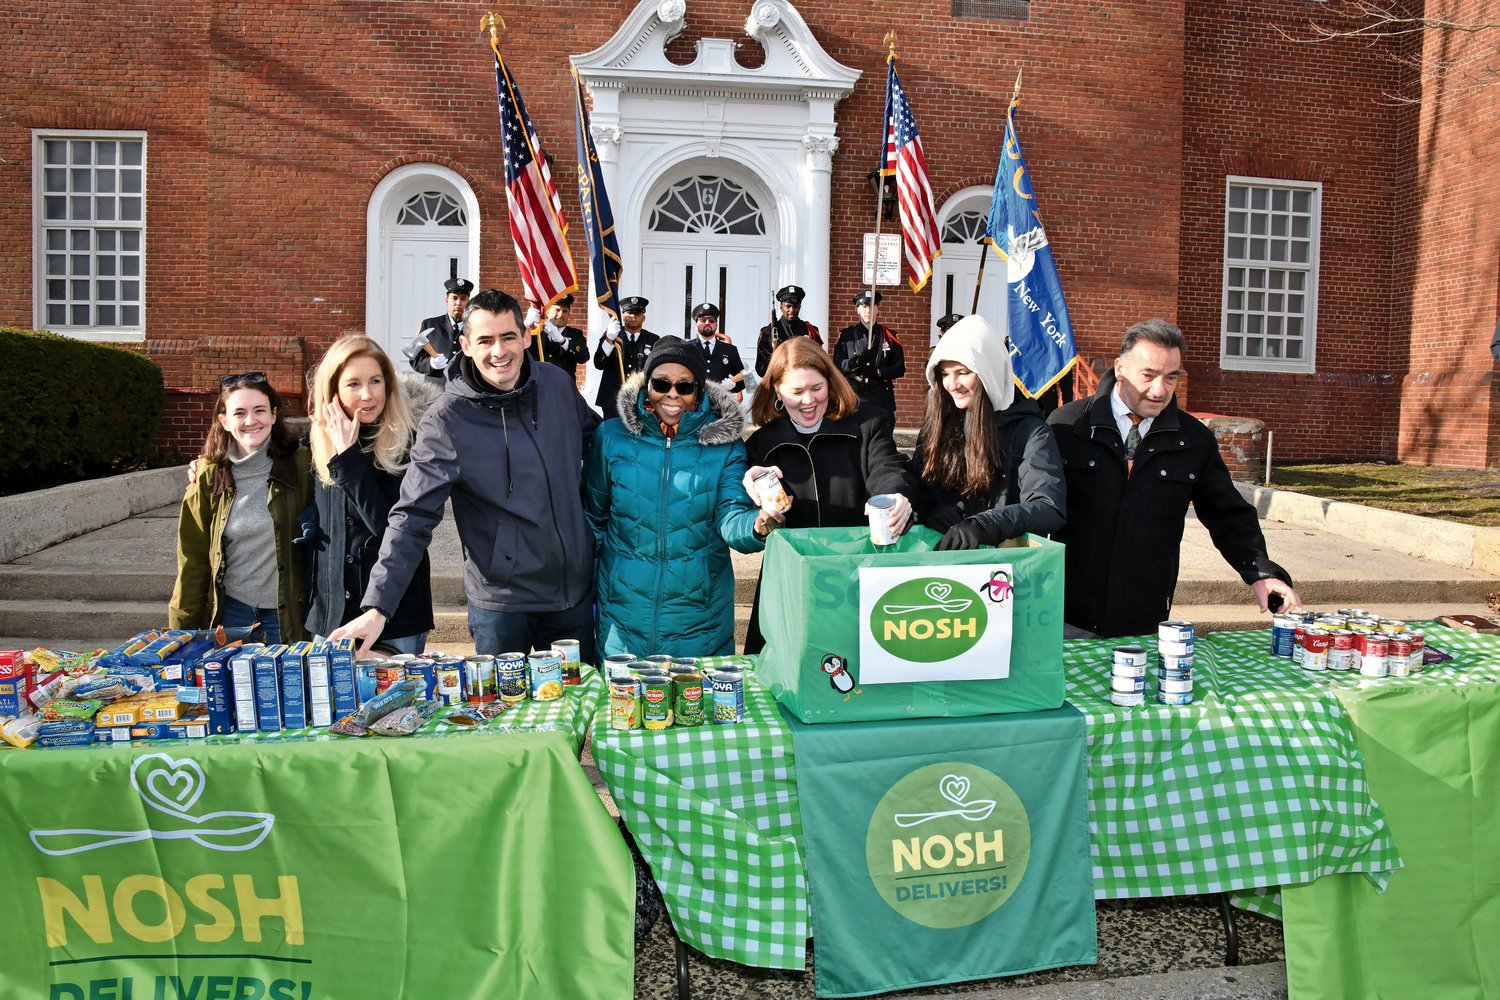 NOSH had a table at the entrance to the middle school to collect food for those in need. Martin Luther King Jr. Day is the only federal holiday designated as a National Day of Service to encourage Americans to volunteer in their communities.